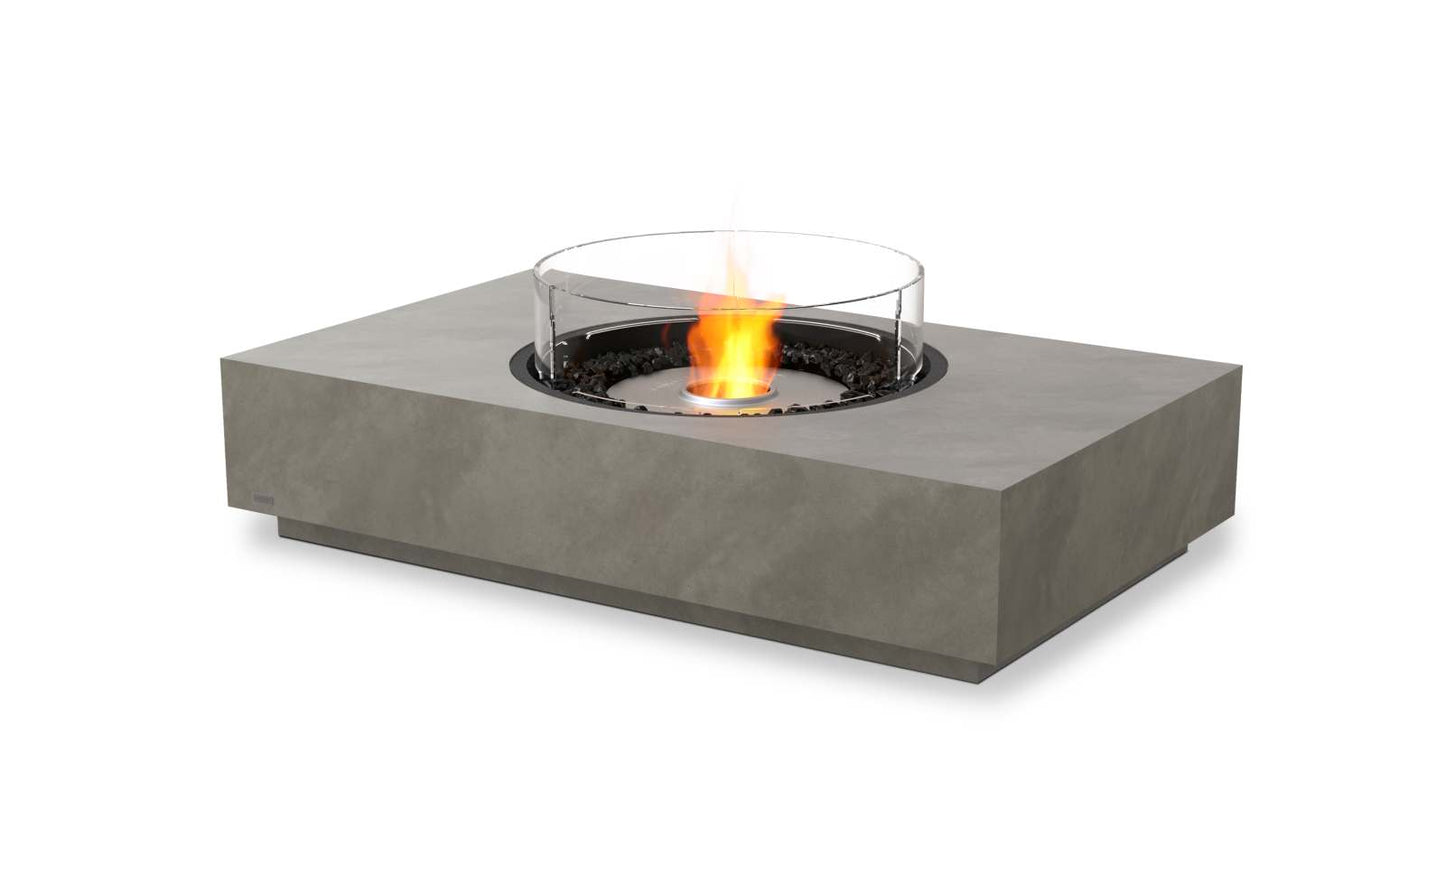 EcoSmart Fire - Martini 50 - Fire Pit Table - Natural